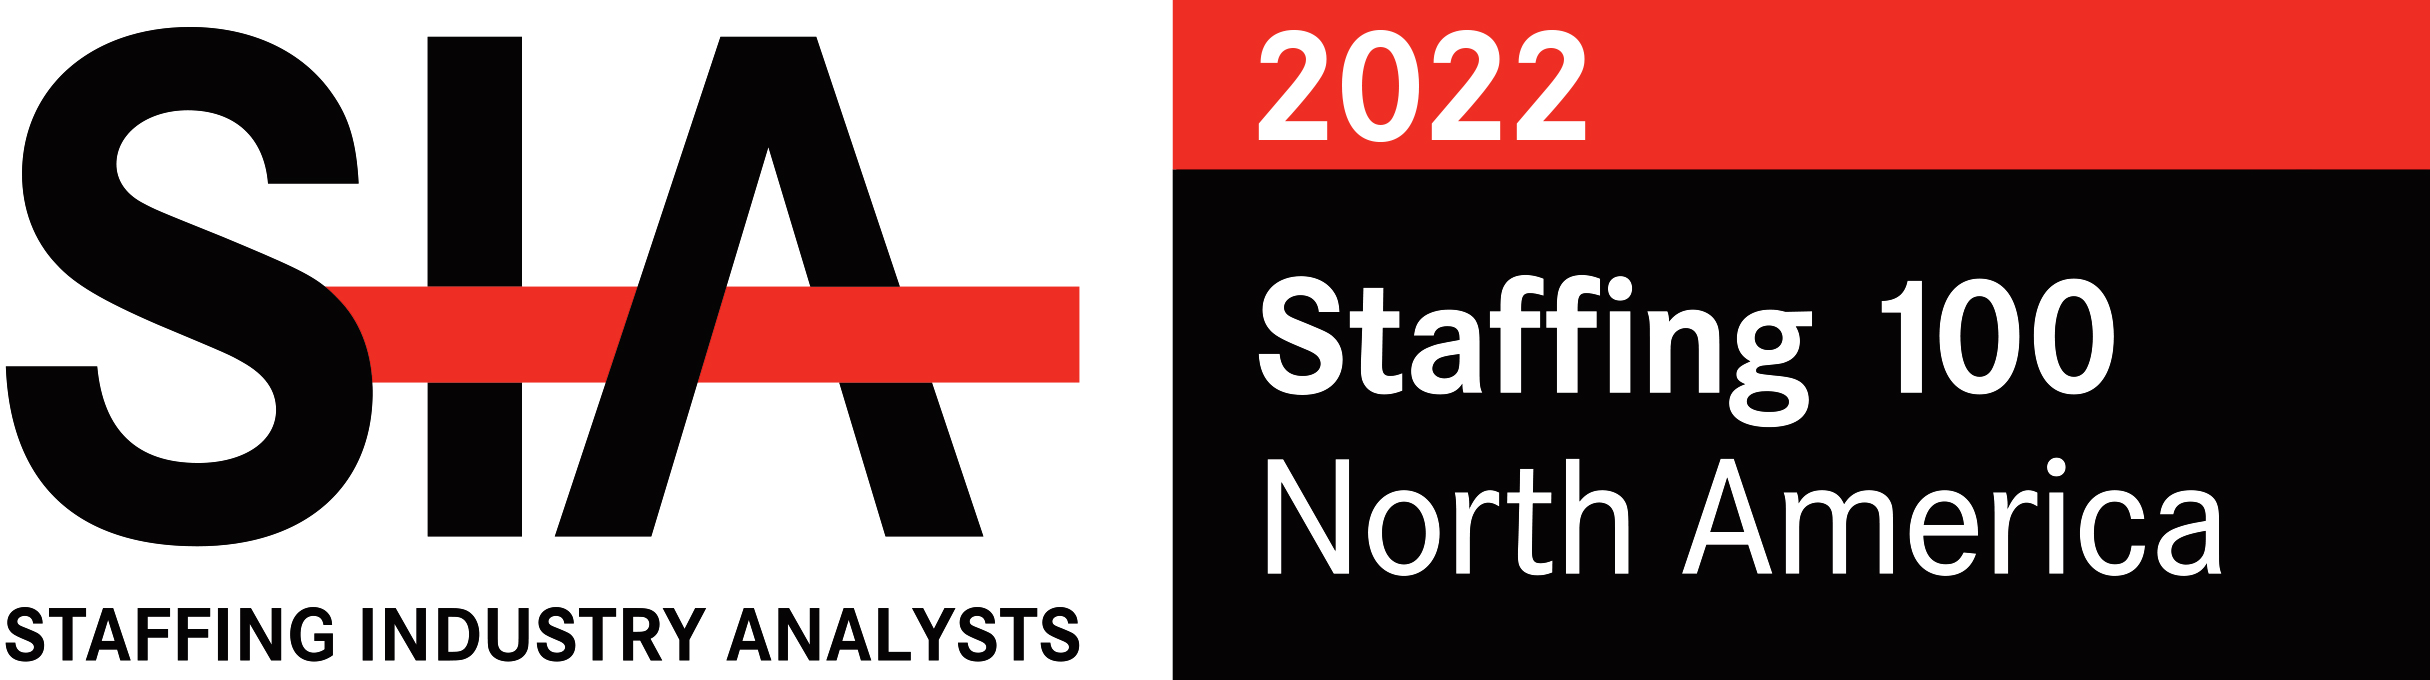 SIA Staffing Industry Analysts 2022 Staffing 100 North America